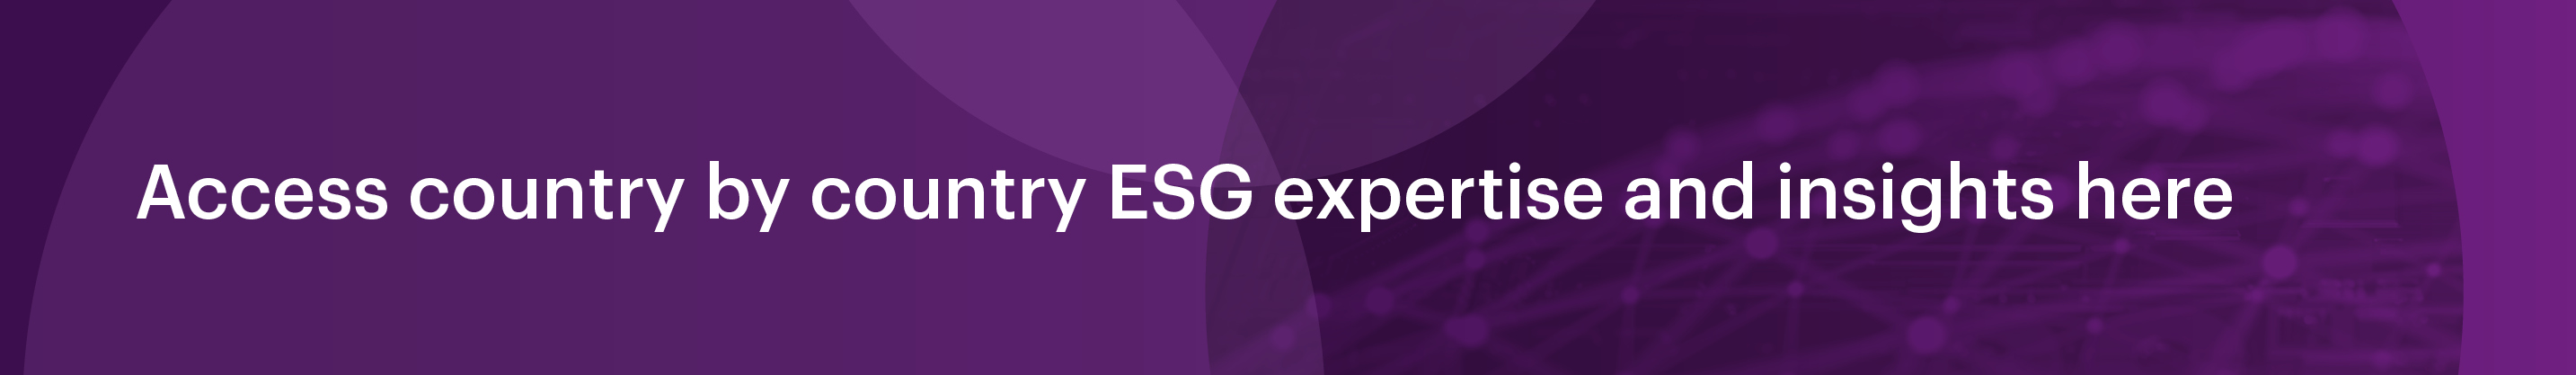 Access country by country ESG expertise and insights here